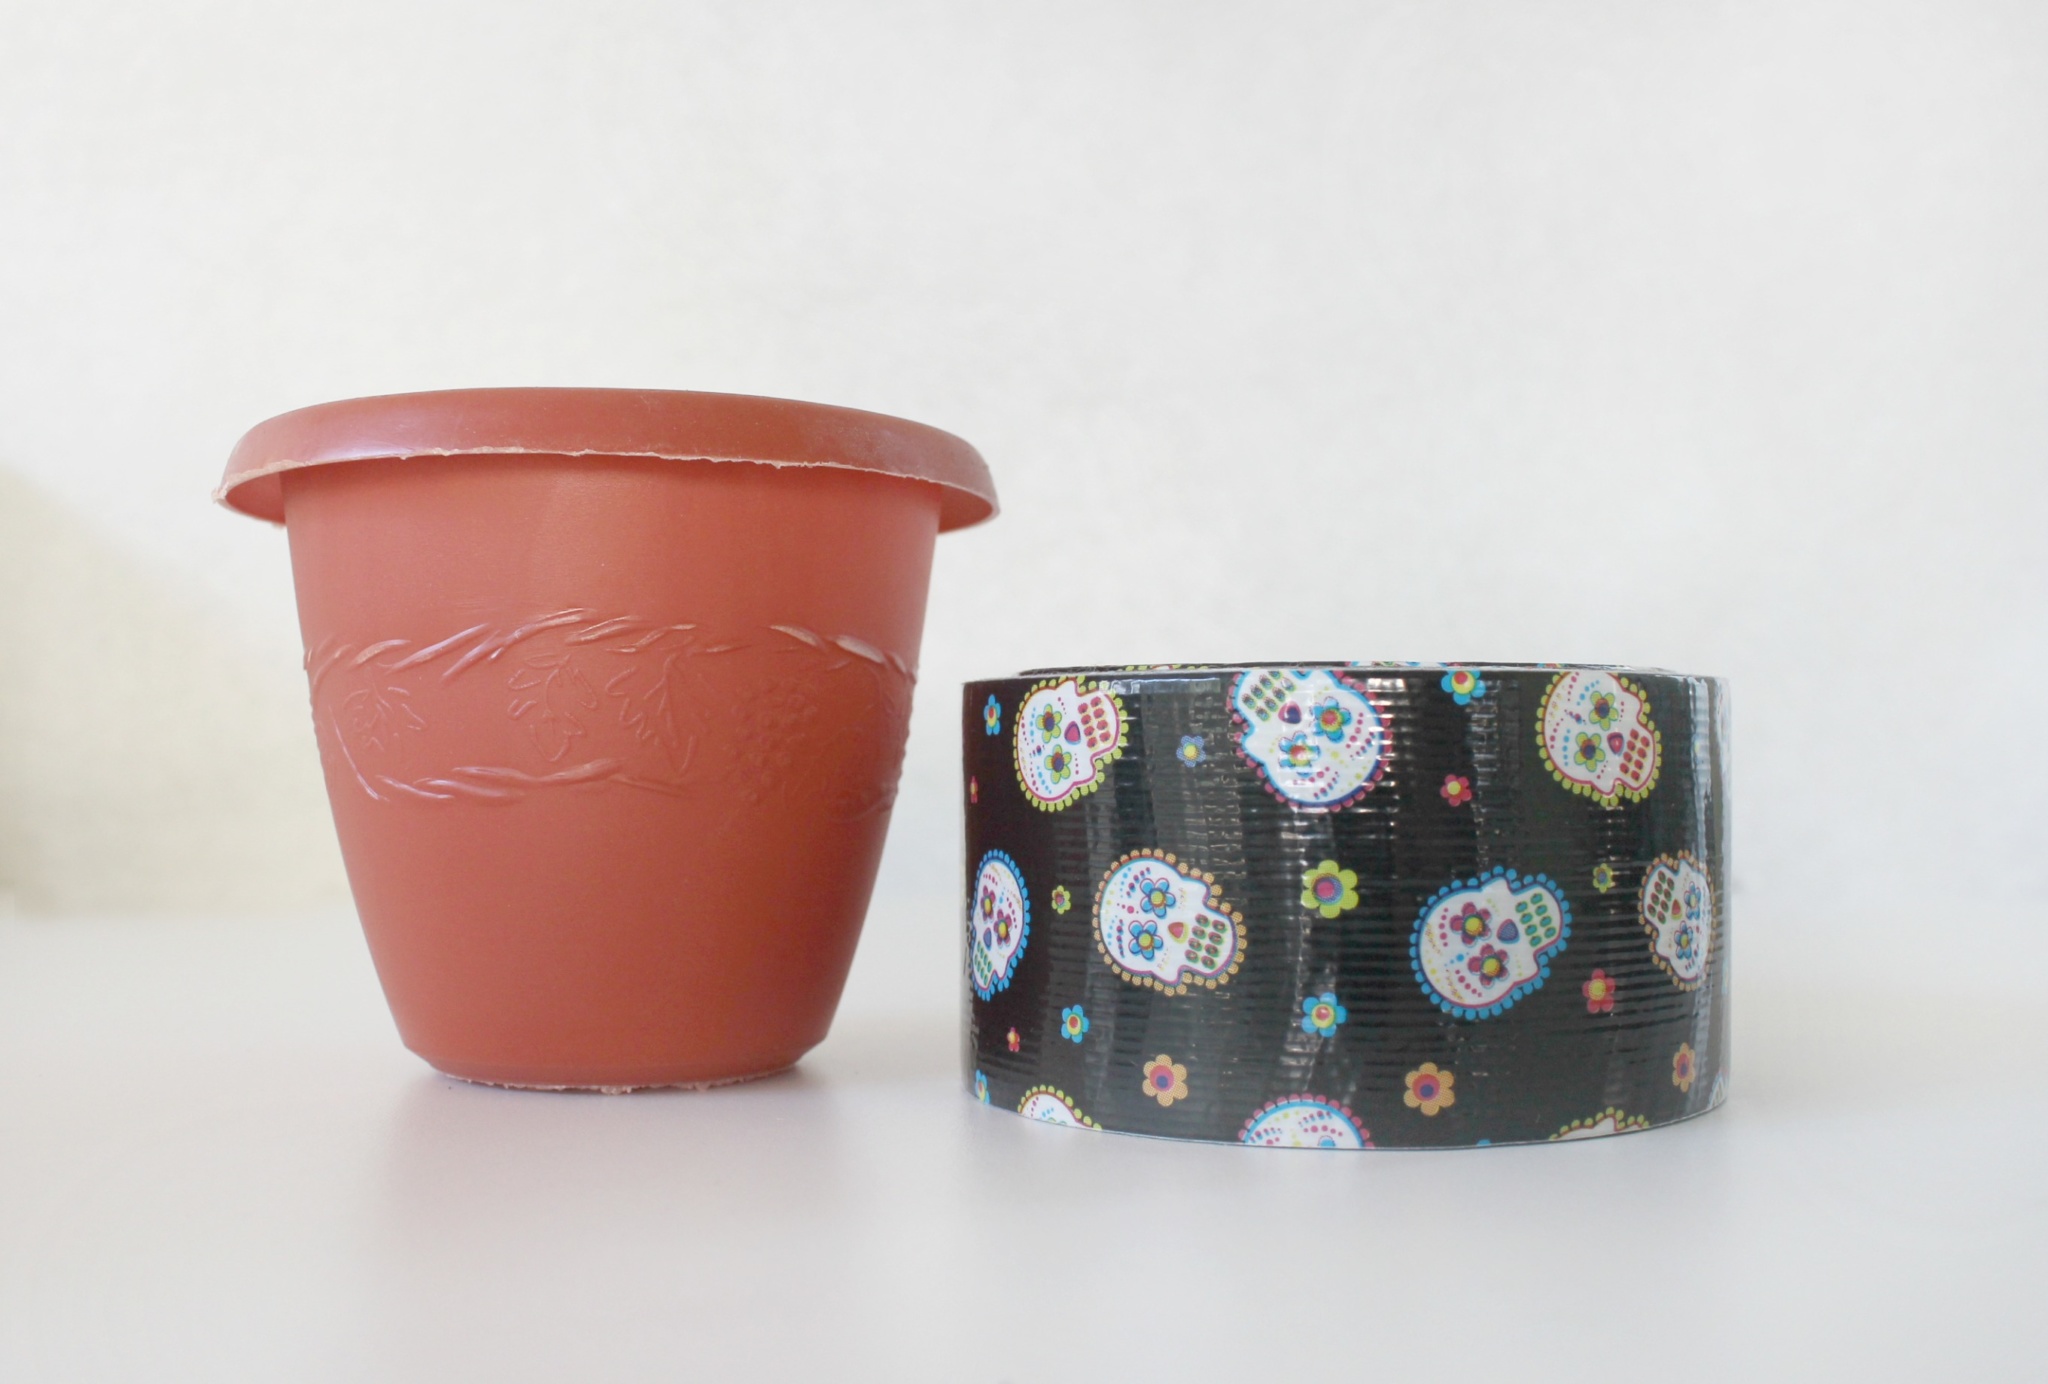 Sugar Skull Pots and Flowers Craft for Kids